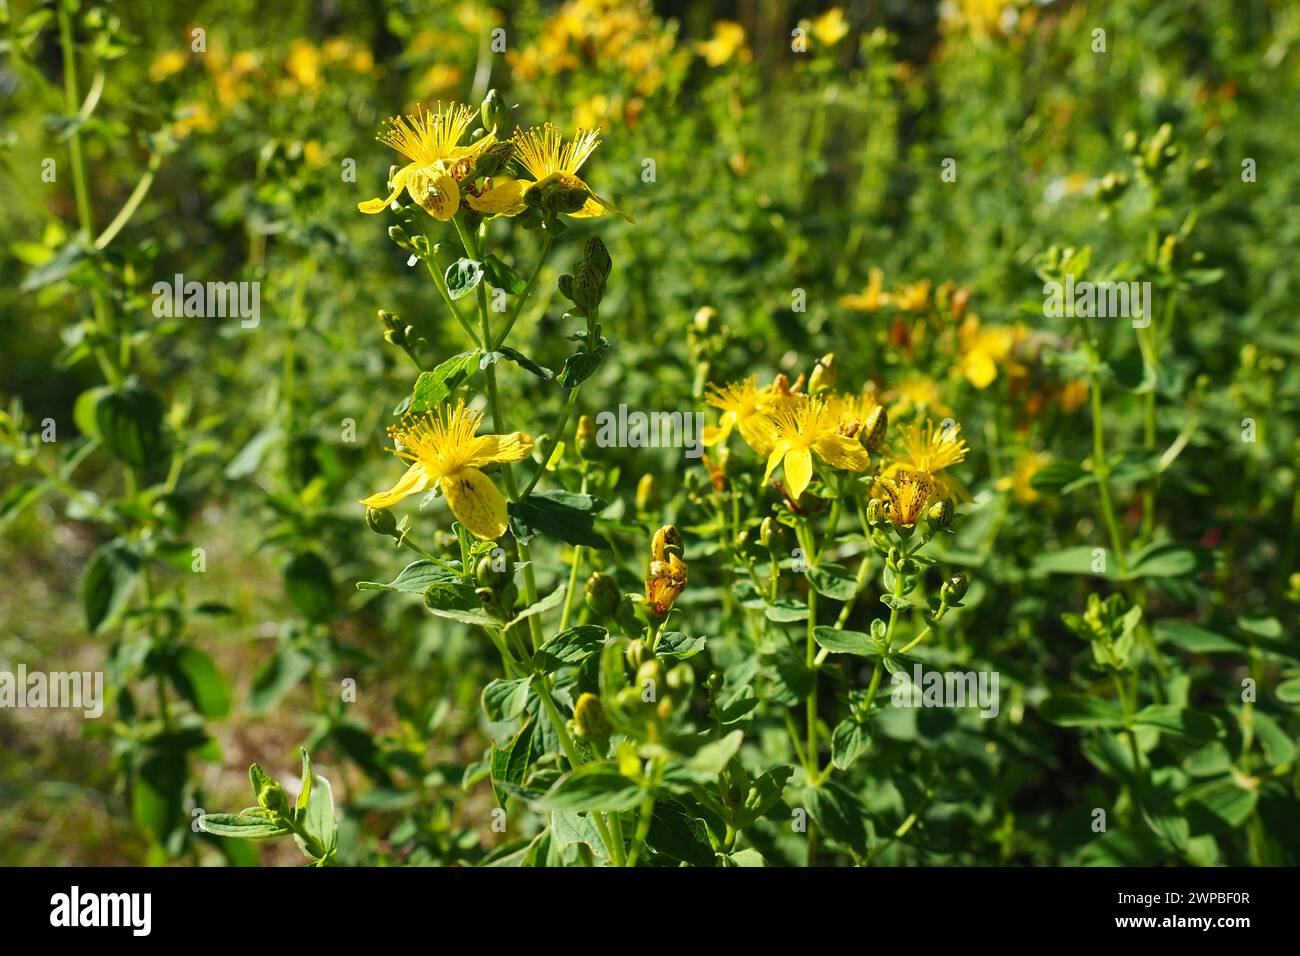 Hypericum perforatum, known as St. John's wort, is a flowering plant in the family Hypericaceae and the type species of the genus Hypericum. Tutsan Stock Photo